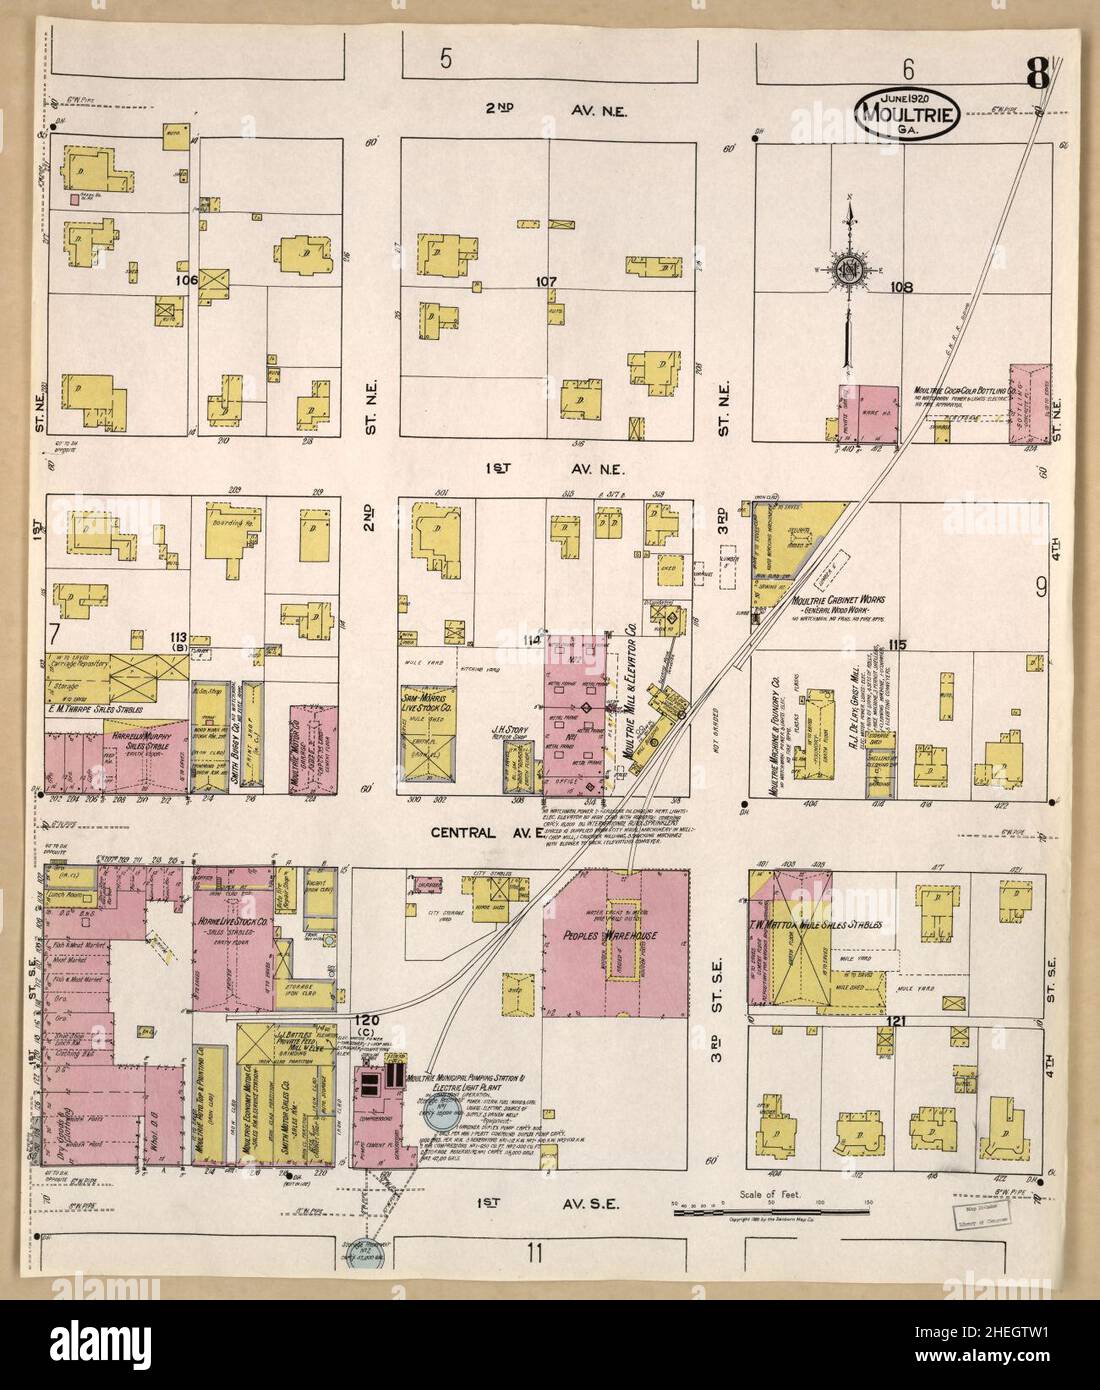 Sanborn Fire Insurance Map from Moultrie, Colquitt County, Georgia. Stock Photo